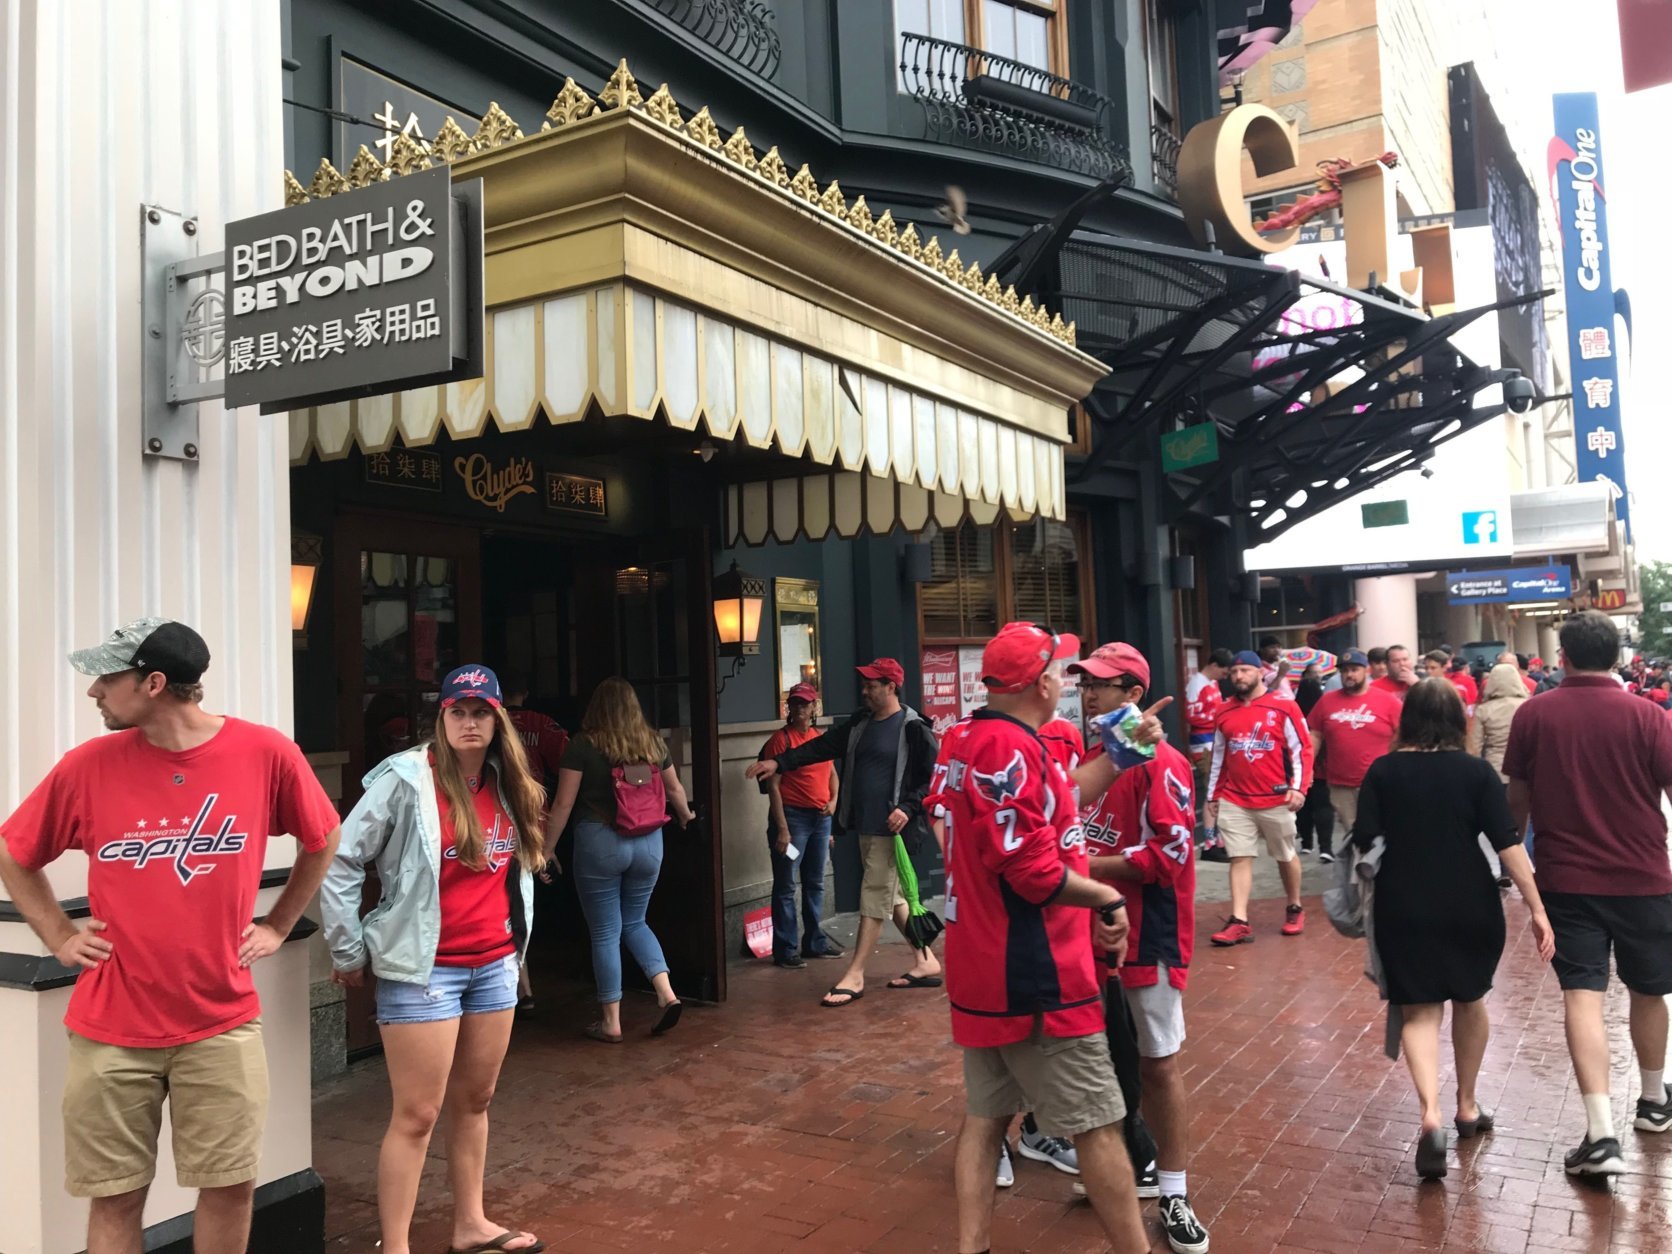 Sidewalks are jammed with people outside Gallery Place before Game 3 of the Stanley Cup Final between the Washington Capitals and the Vegas Golden Knights on Saturday, Jne 2, 2018. (WTOP/Dick Uliano)